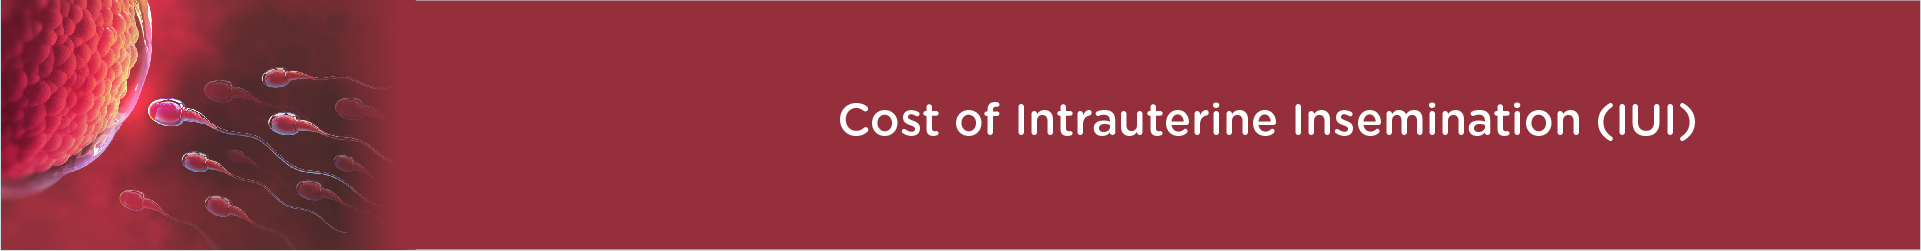 How Much Does Intra Uterine Insemination Cost?